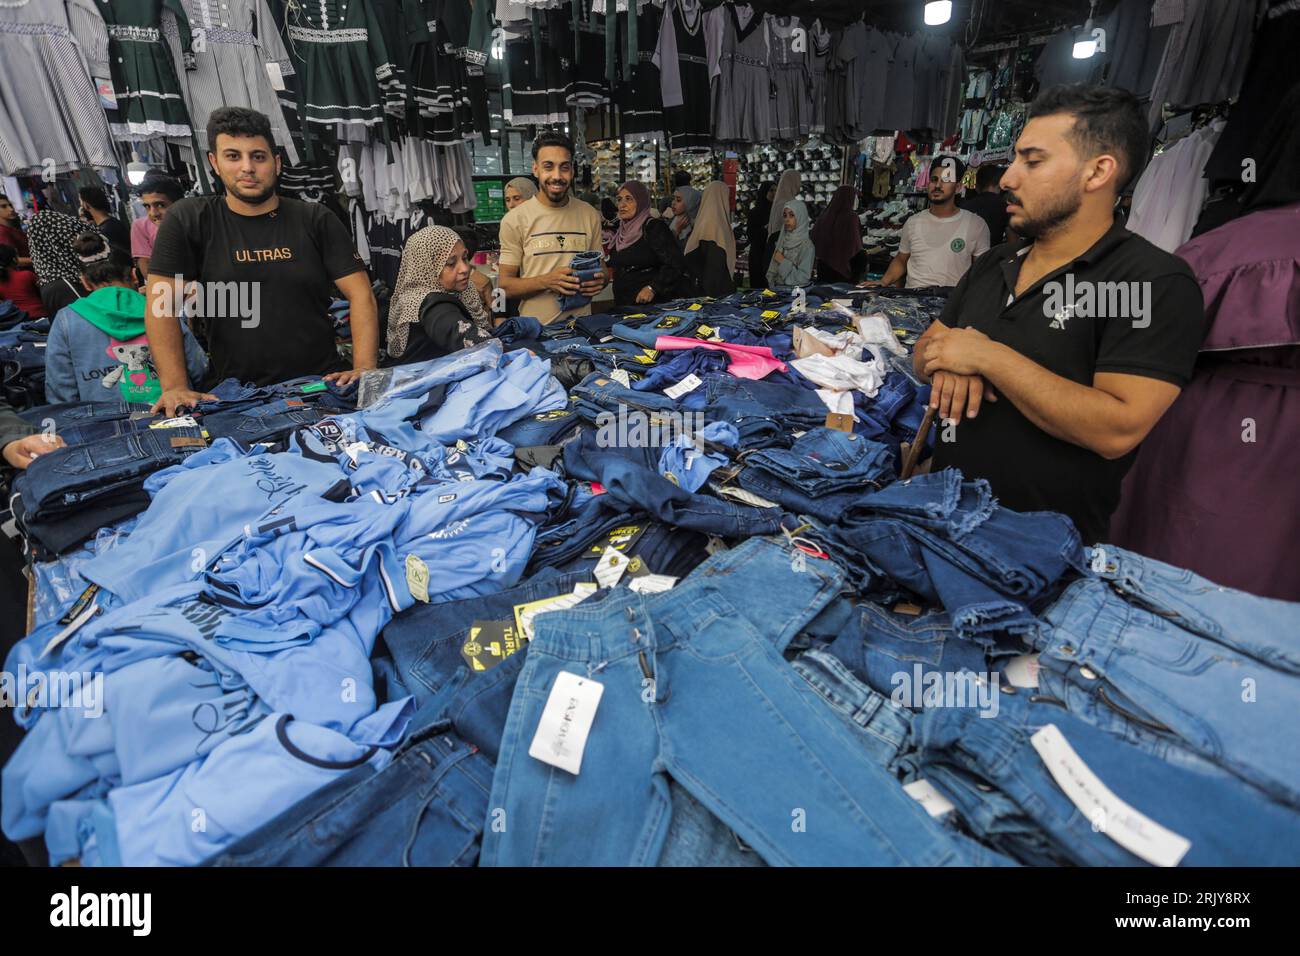 Palestinians seen shopping during the preparation for the new school year at the market in Gaza. Stock Photo